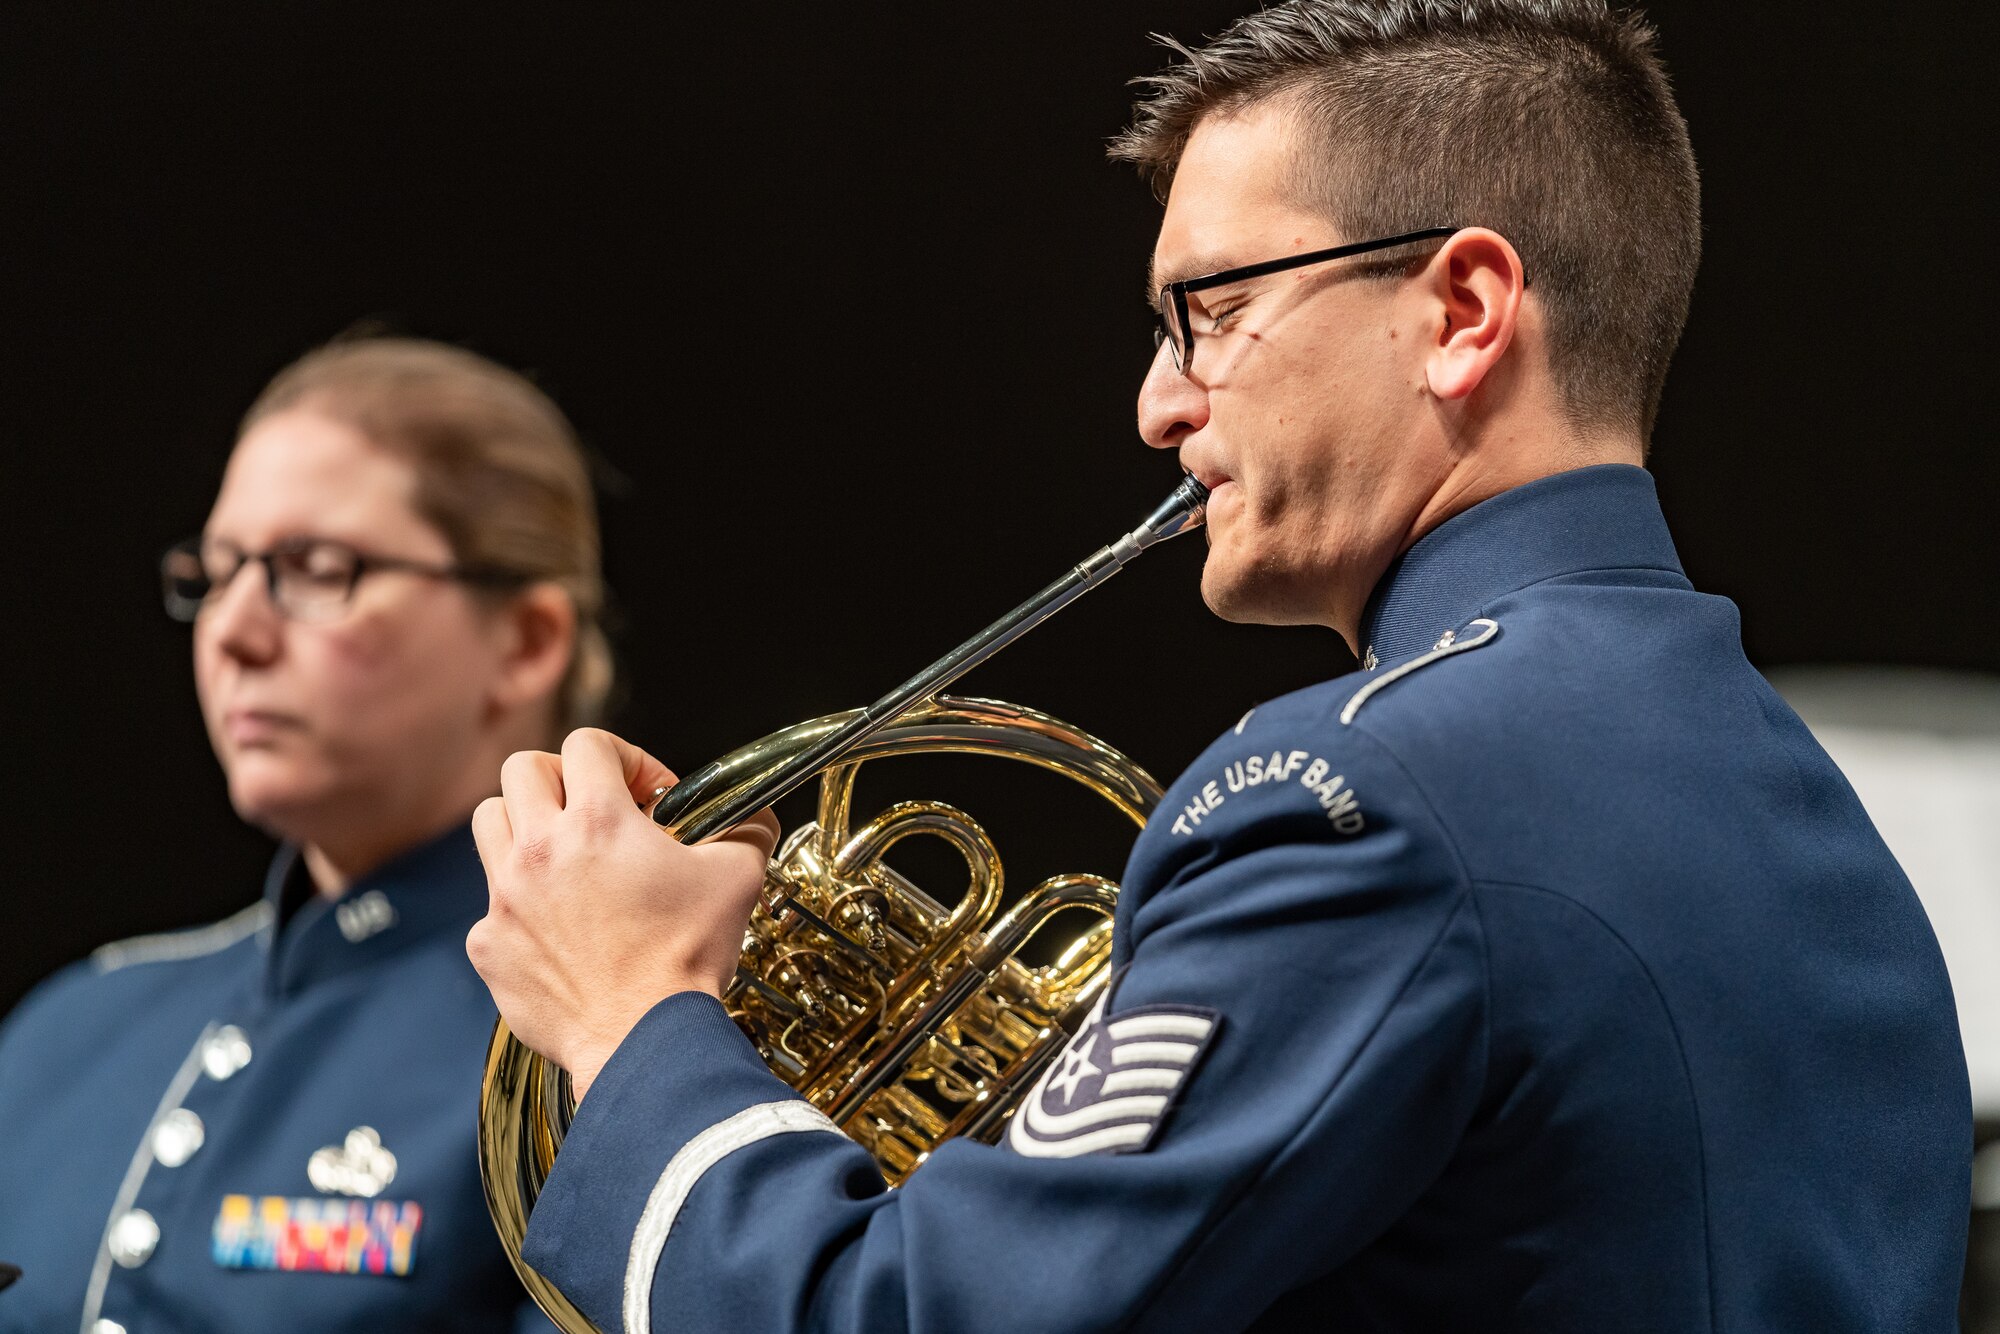 Man performing the French horn while wearing the blue Air Force ceremonial band uniform, with a woman in the background.